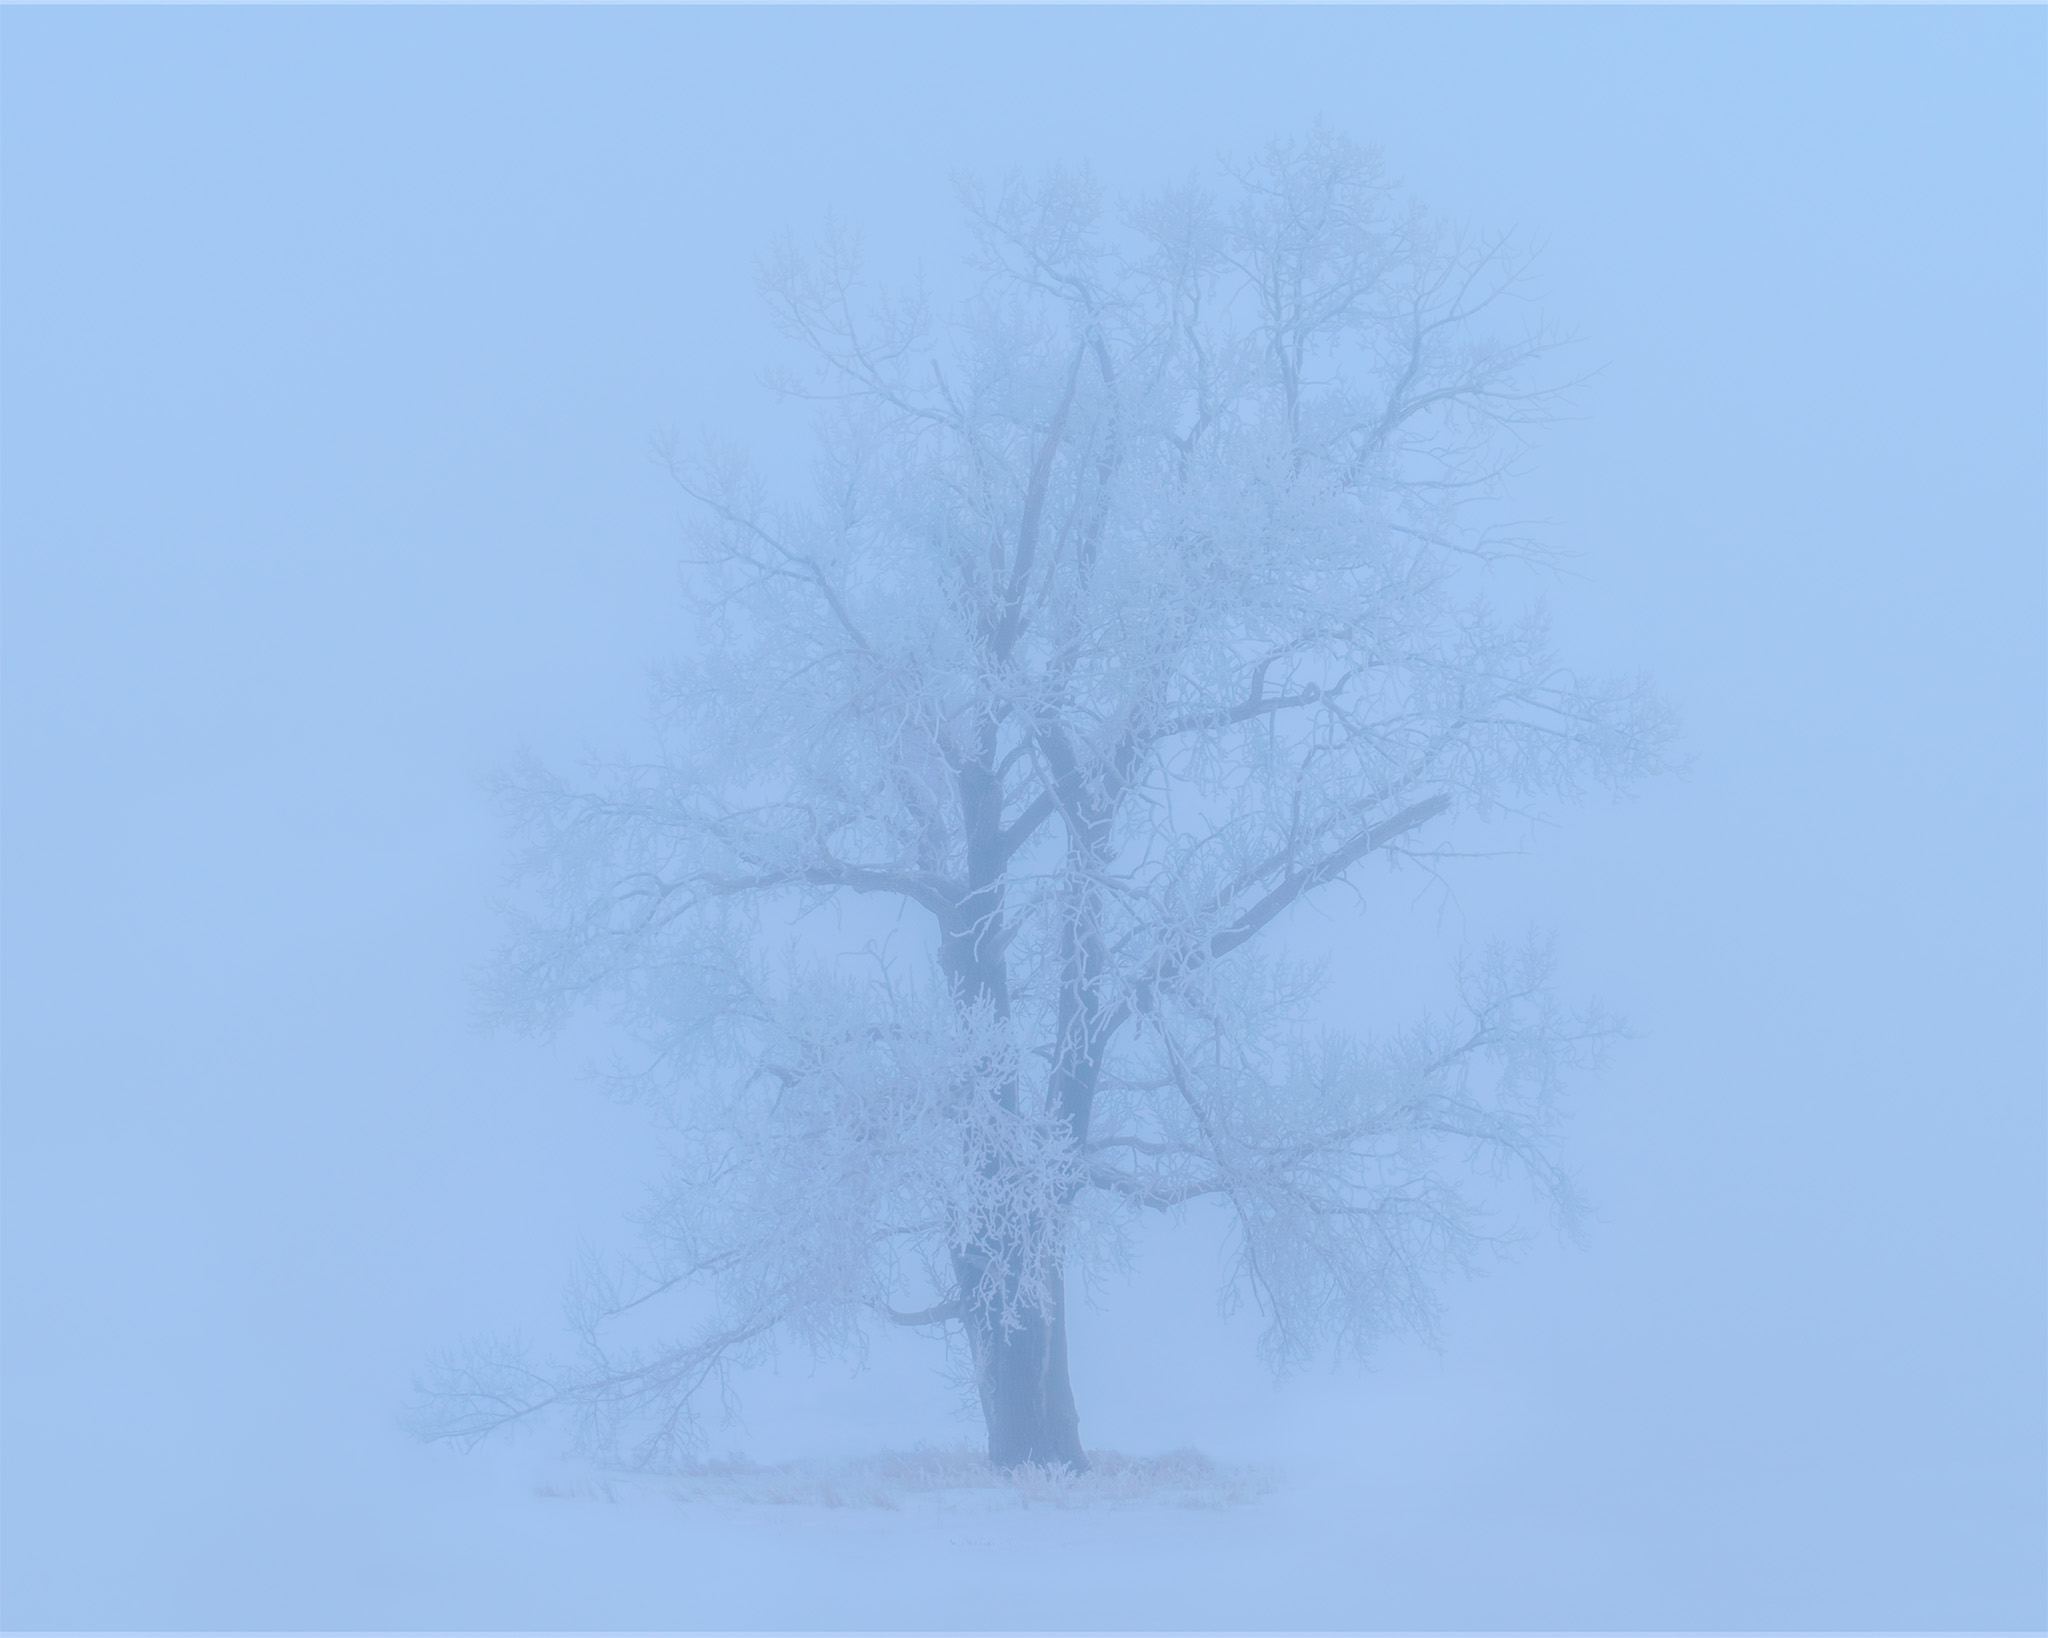 A lone tree enveloped in ice and fog in Saskatchewan